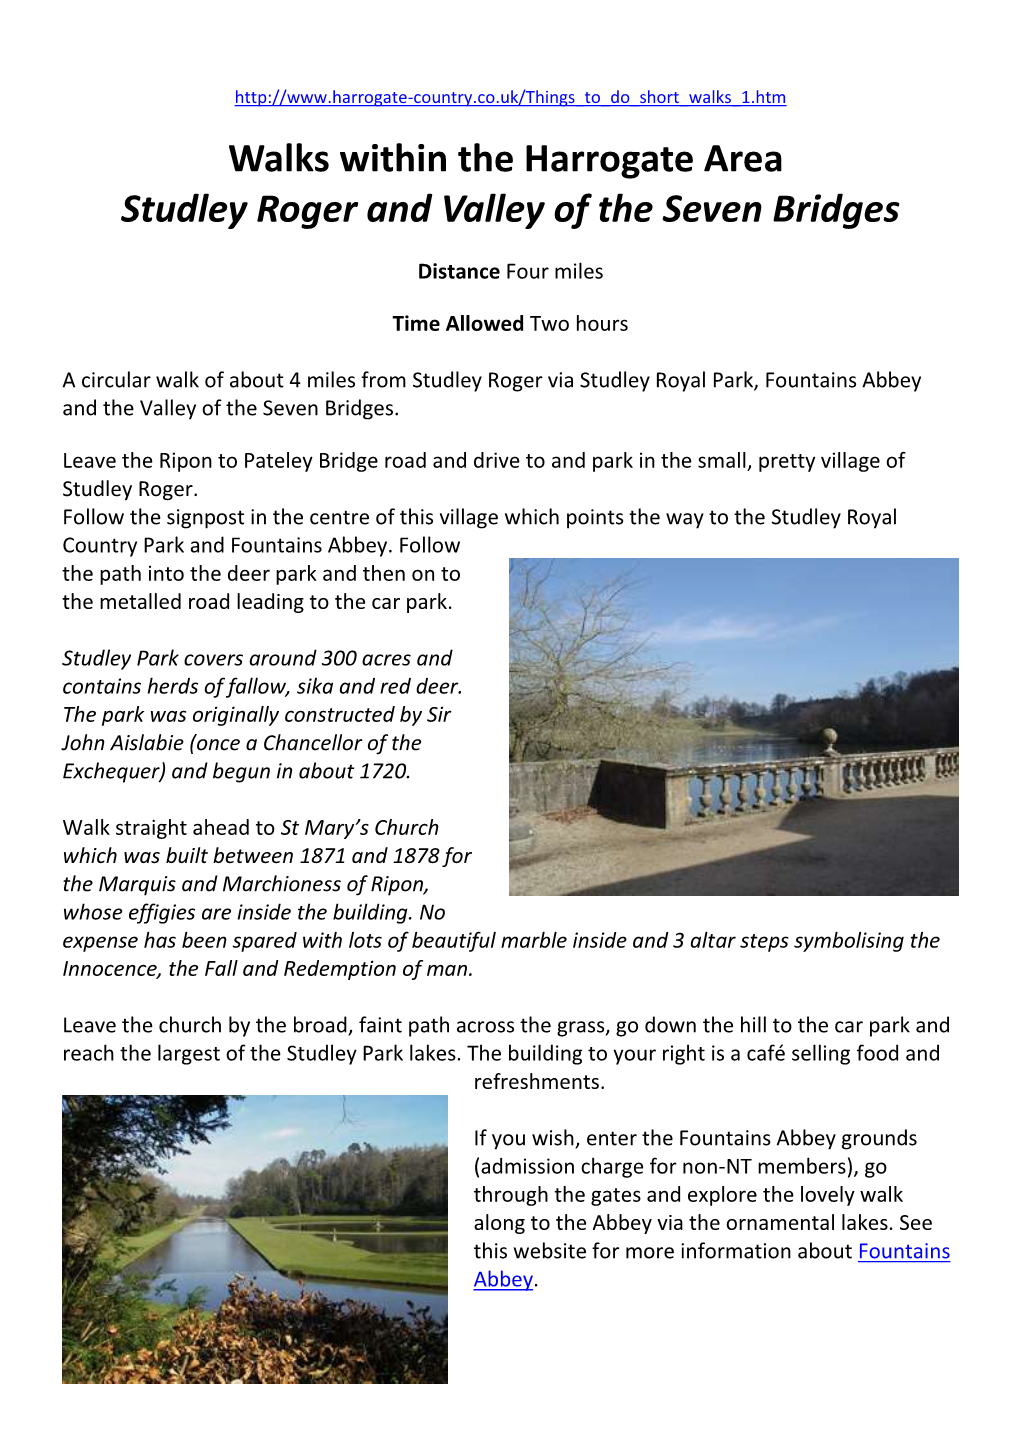 Studley Roger & the Valley of the Seven Bridges